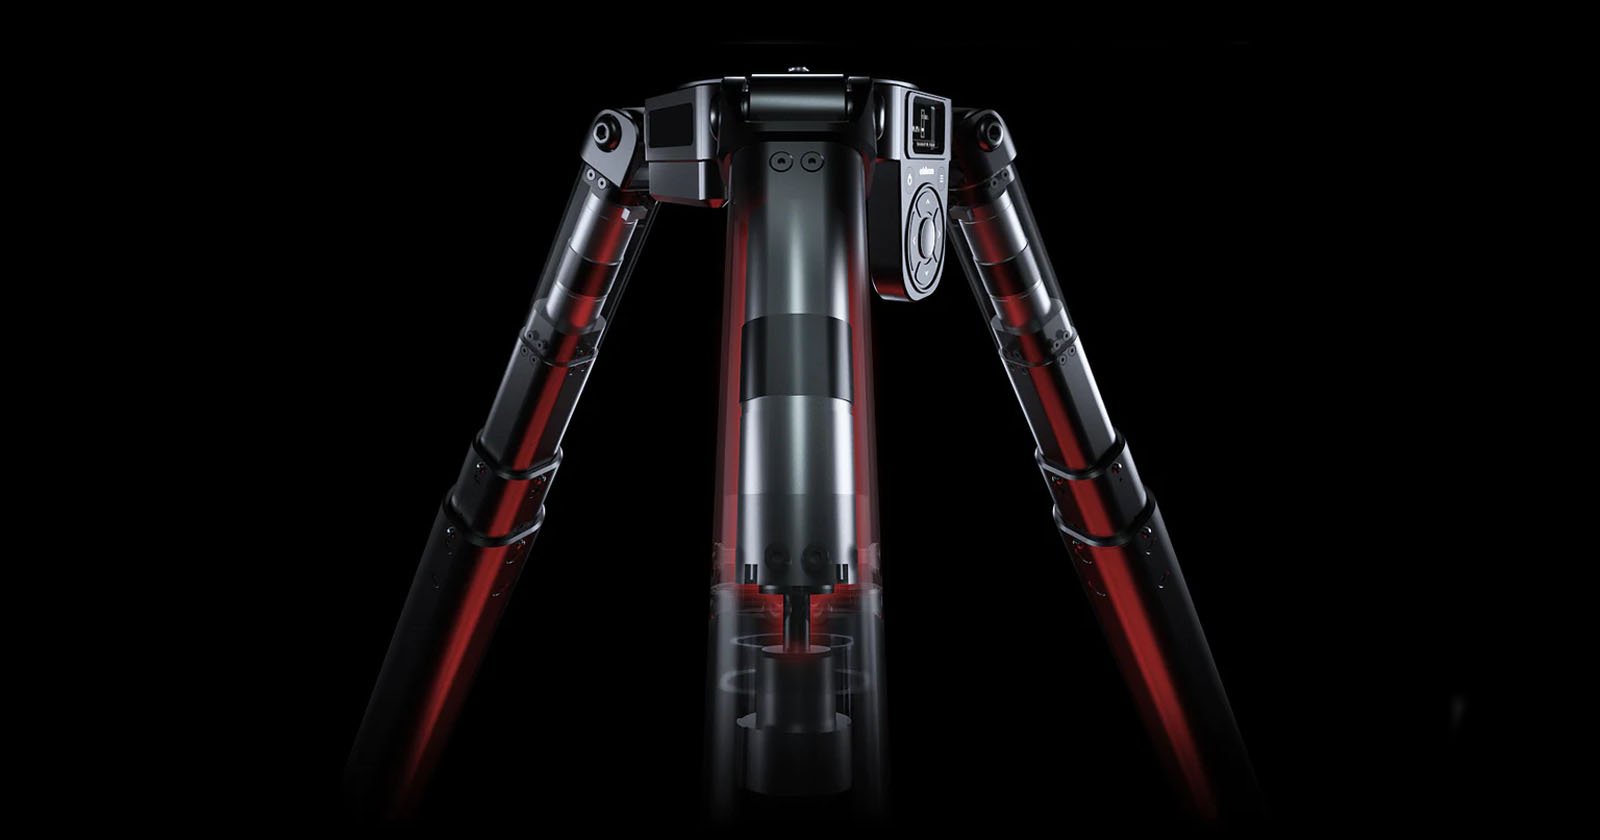 The Edelkrone Tripod X is the Worlds First Fully Motorized Video Tripod